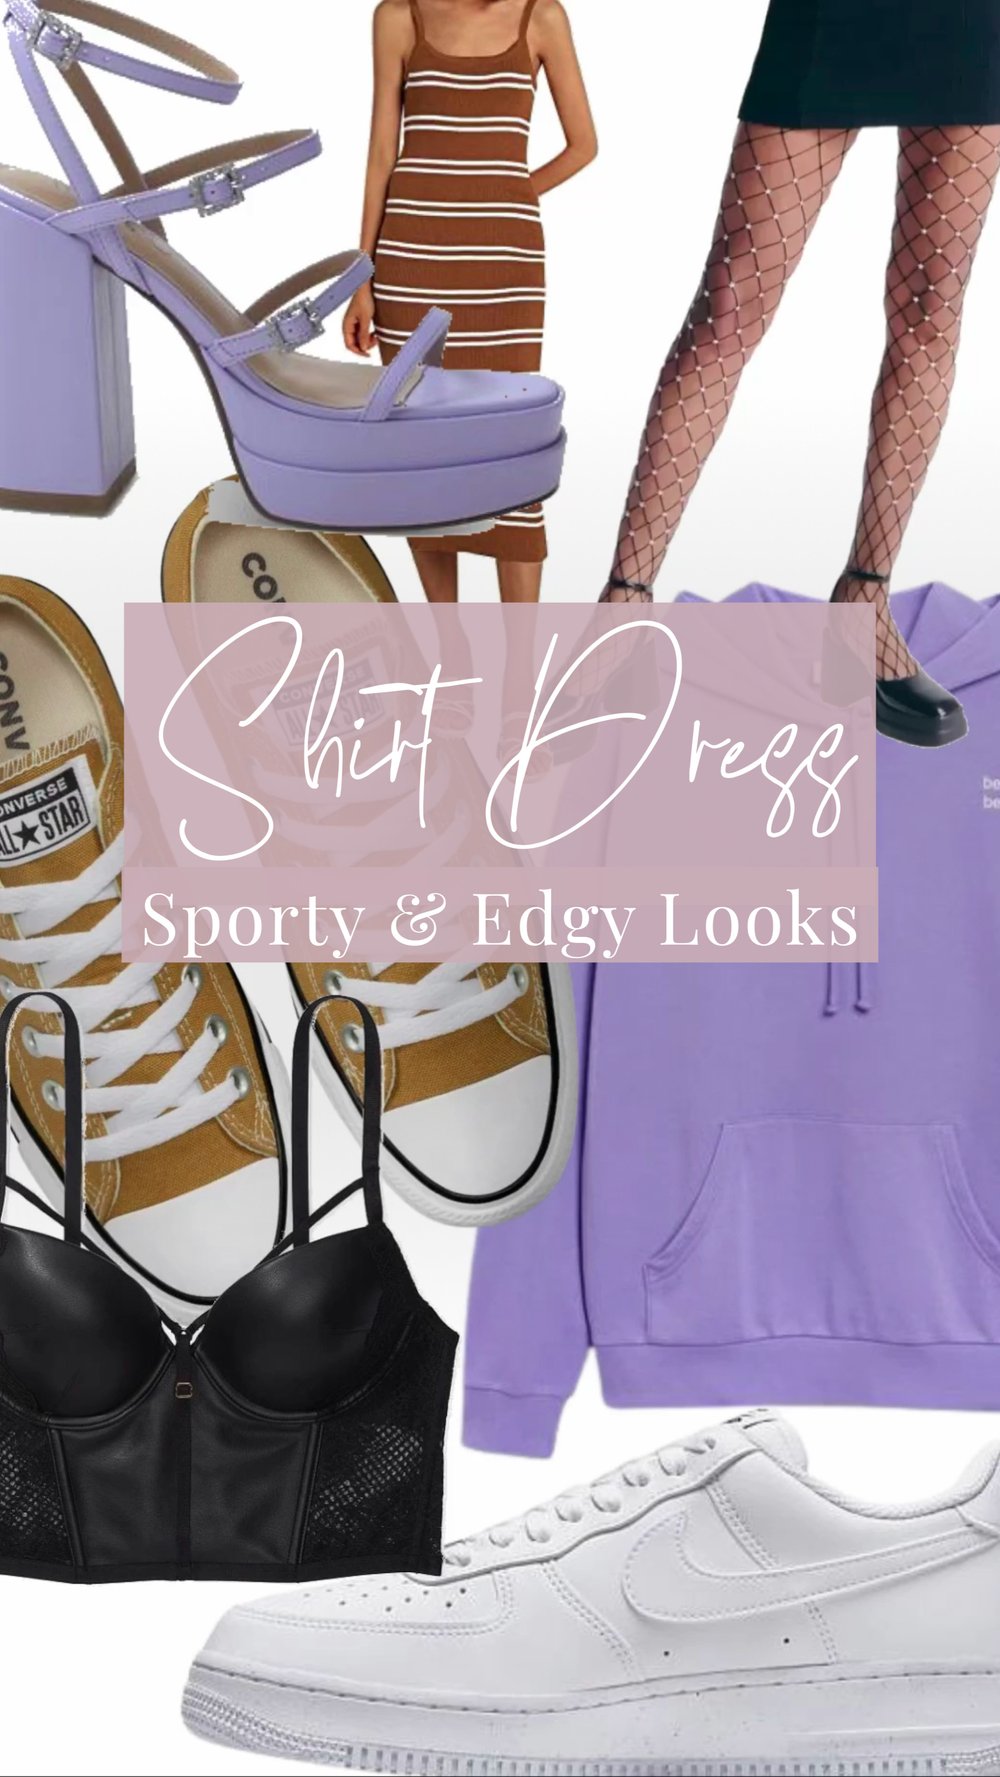 SPORTY LOOKS ALLOW YOU TO BE ACTIVE, COMFORTABLE &amp; POLISHED. WHEN WEARING EDGY LOOKS YOU ARE EXPRESSING YOUR DARING SIDE!